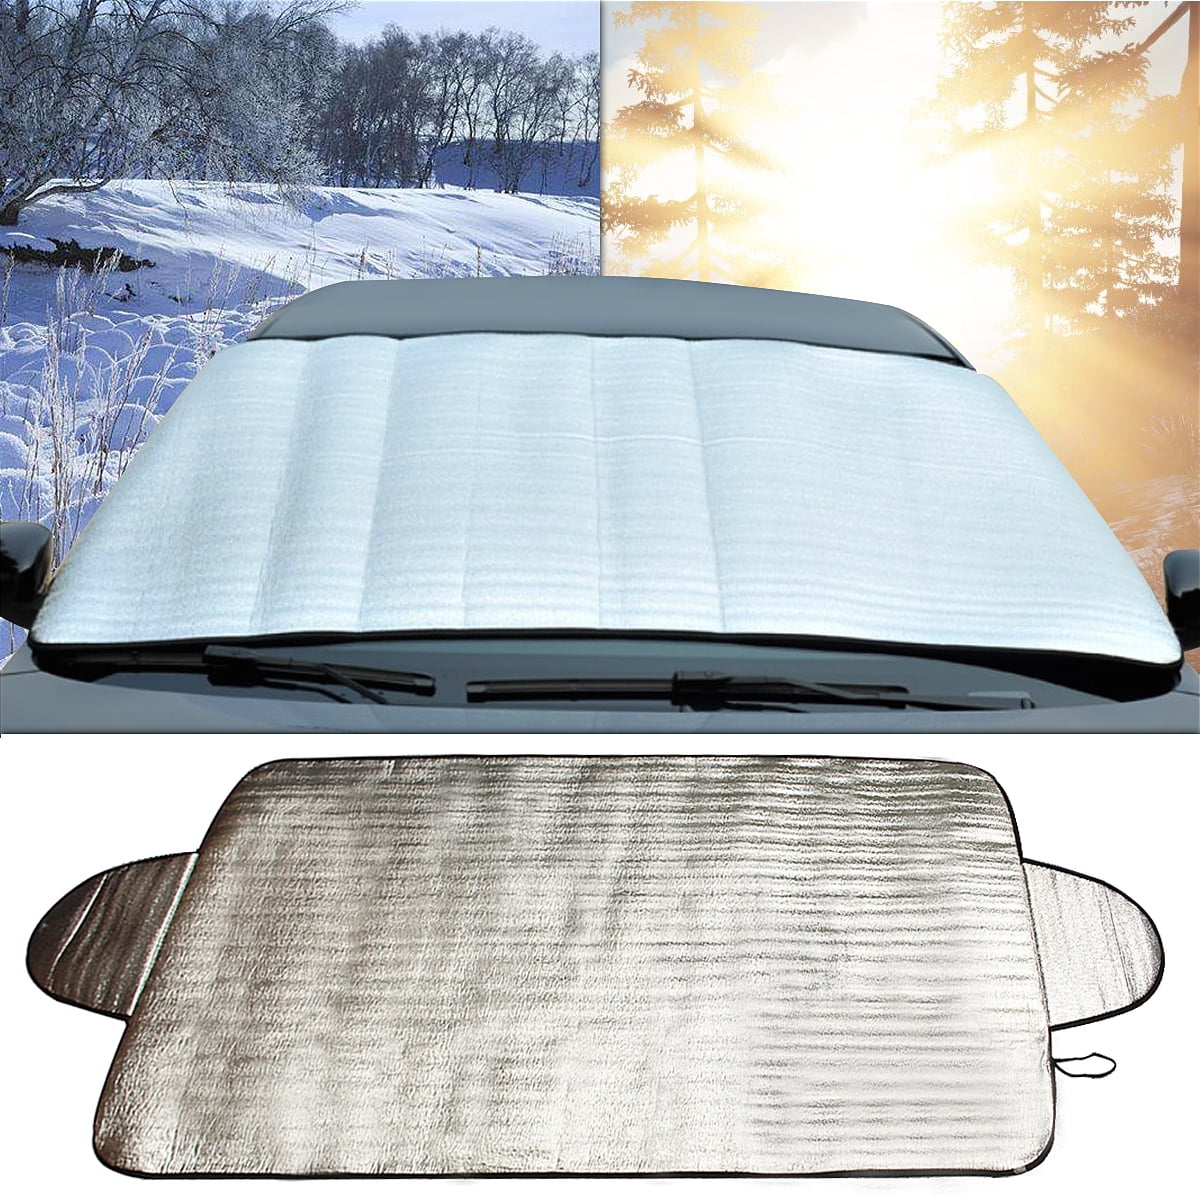 2 xCar Windscreen Cover Anti Snow Frost Ice Shield Dust Protector Heat Sun Shade 